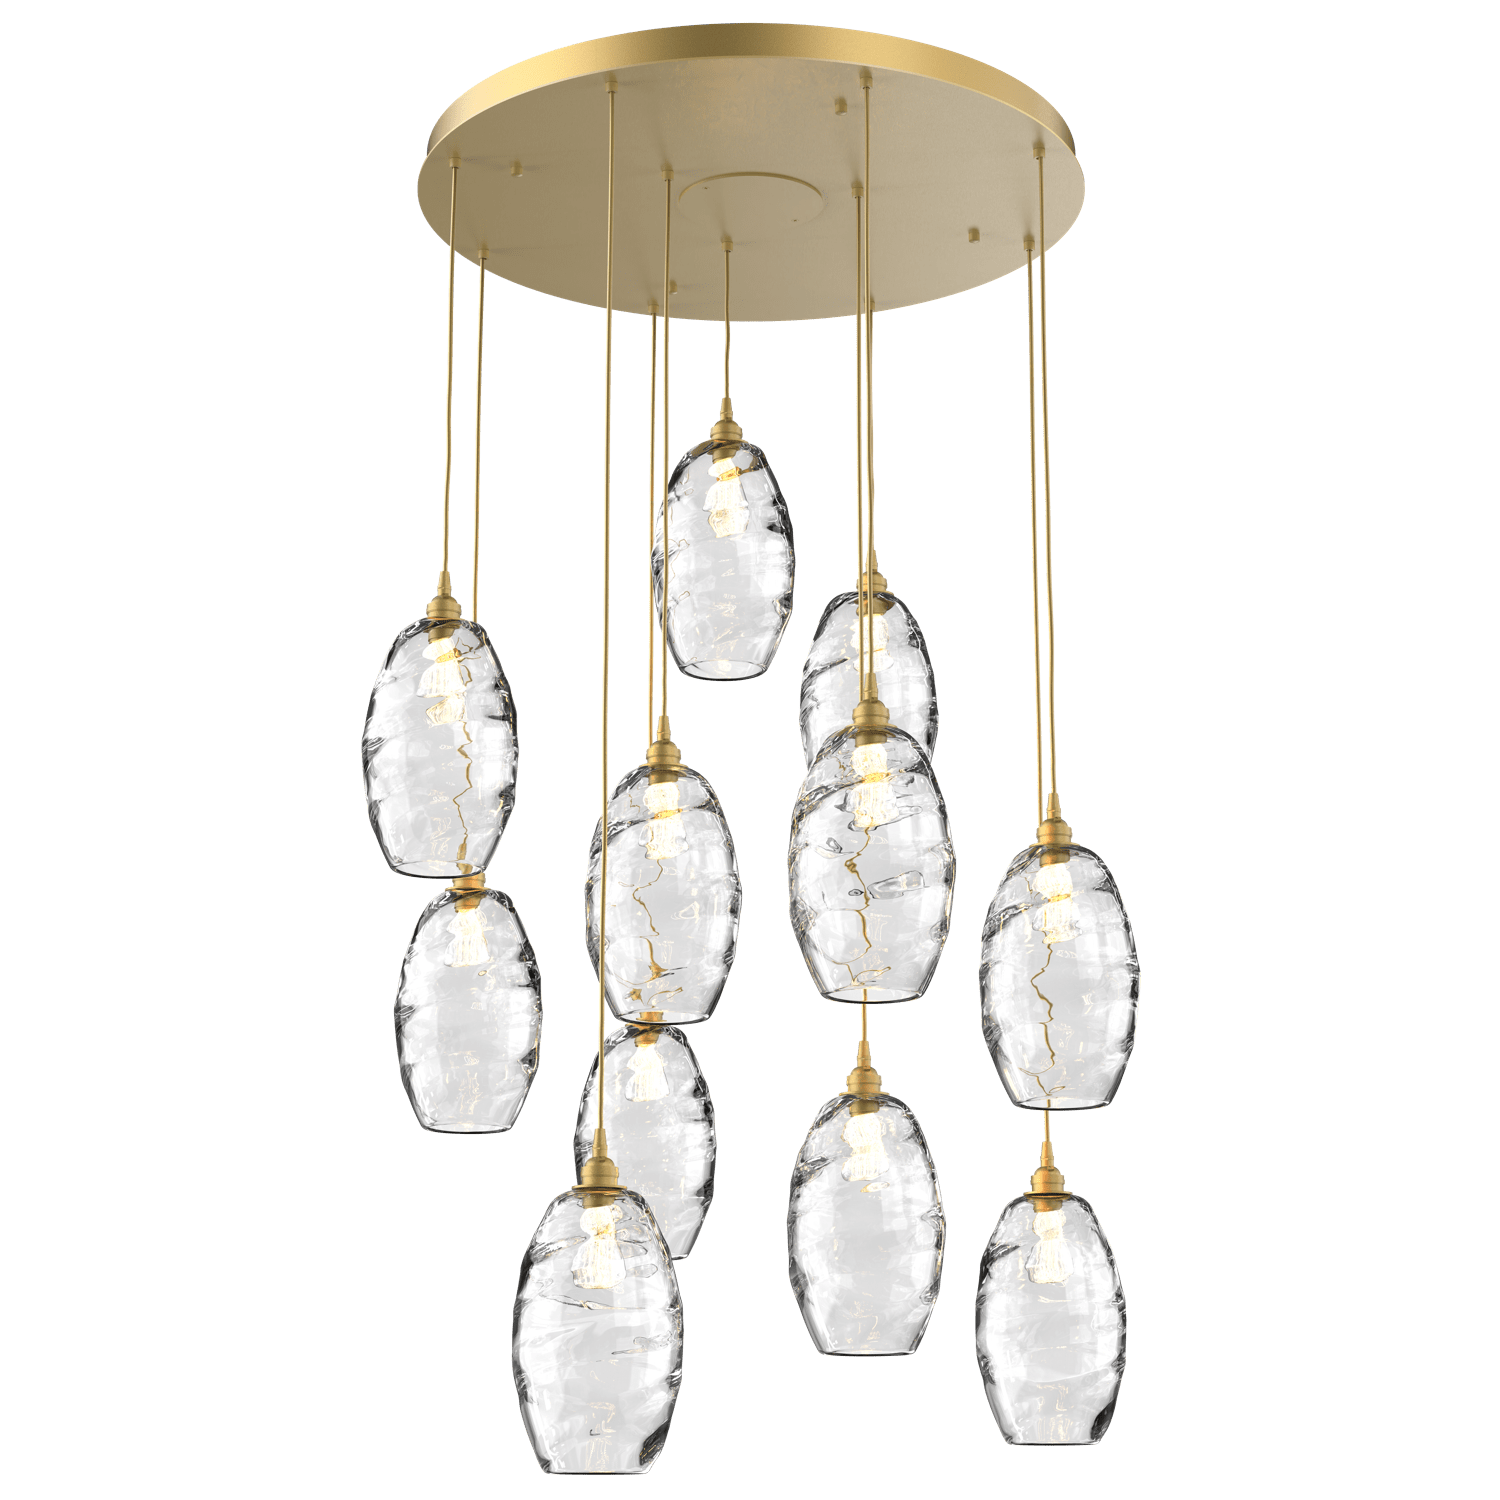 CHB0035-11-GB-OC-Hammerton-Studio-Optic-Blown-Glass-Elisse-11-light-round-pendant-chandelier-with-gilded-brass-finish-and-optic-clear-blown-glass-shades-and-incandescent-lamping